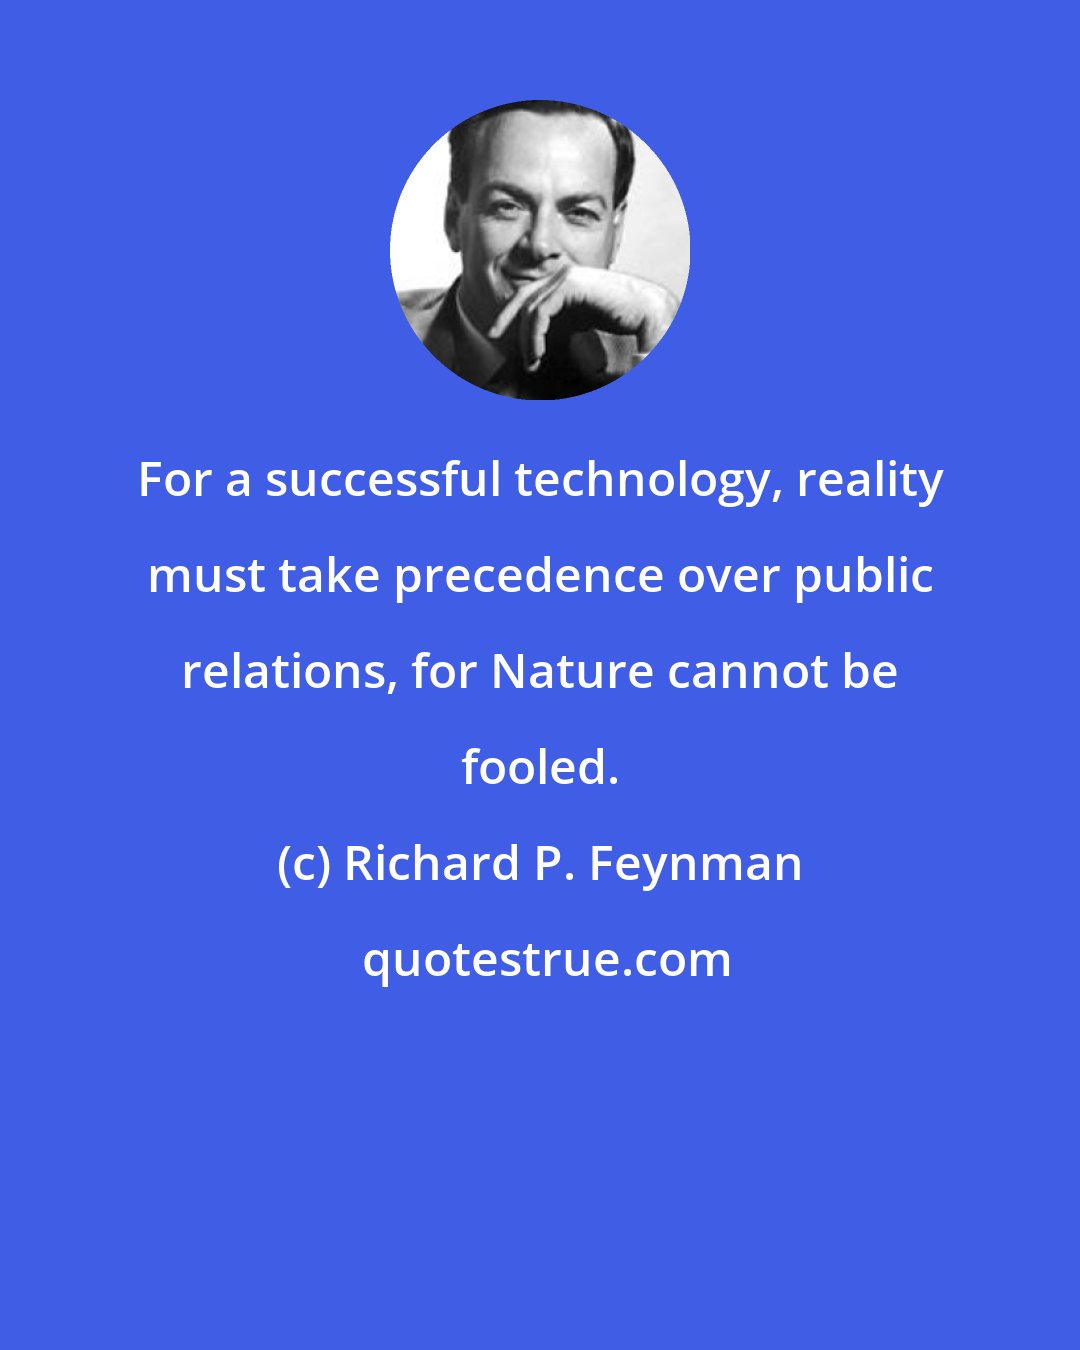 Richard P. Feynman: For a successful technology, reality must take precedence over public relations, for Nature cannot be fooled.